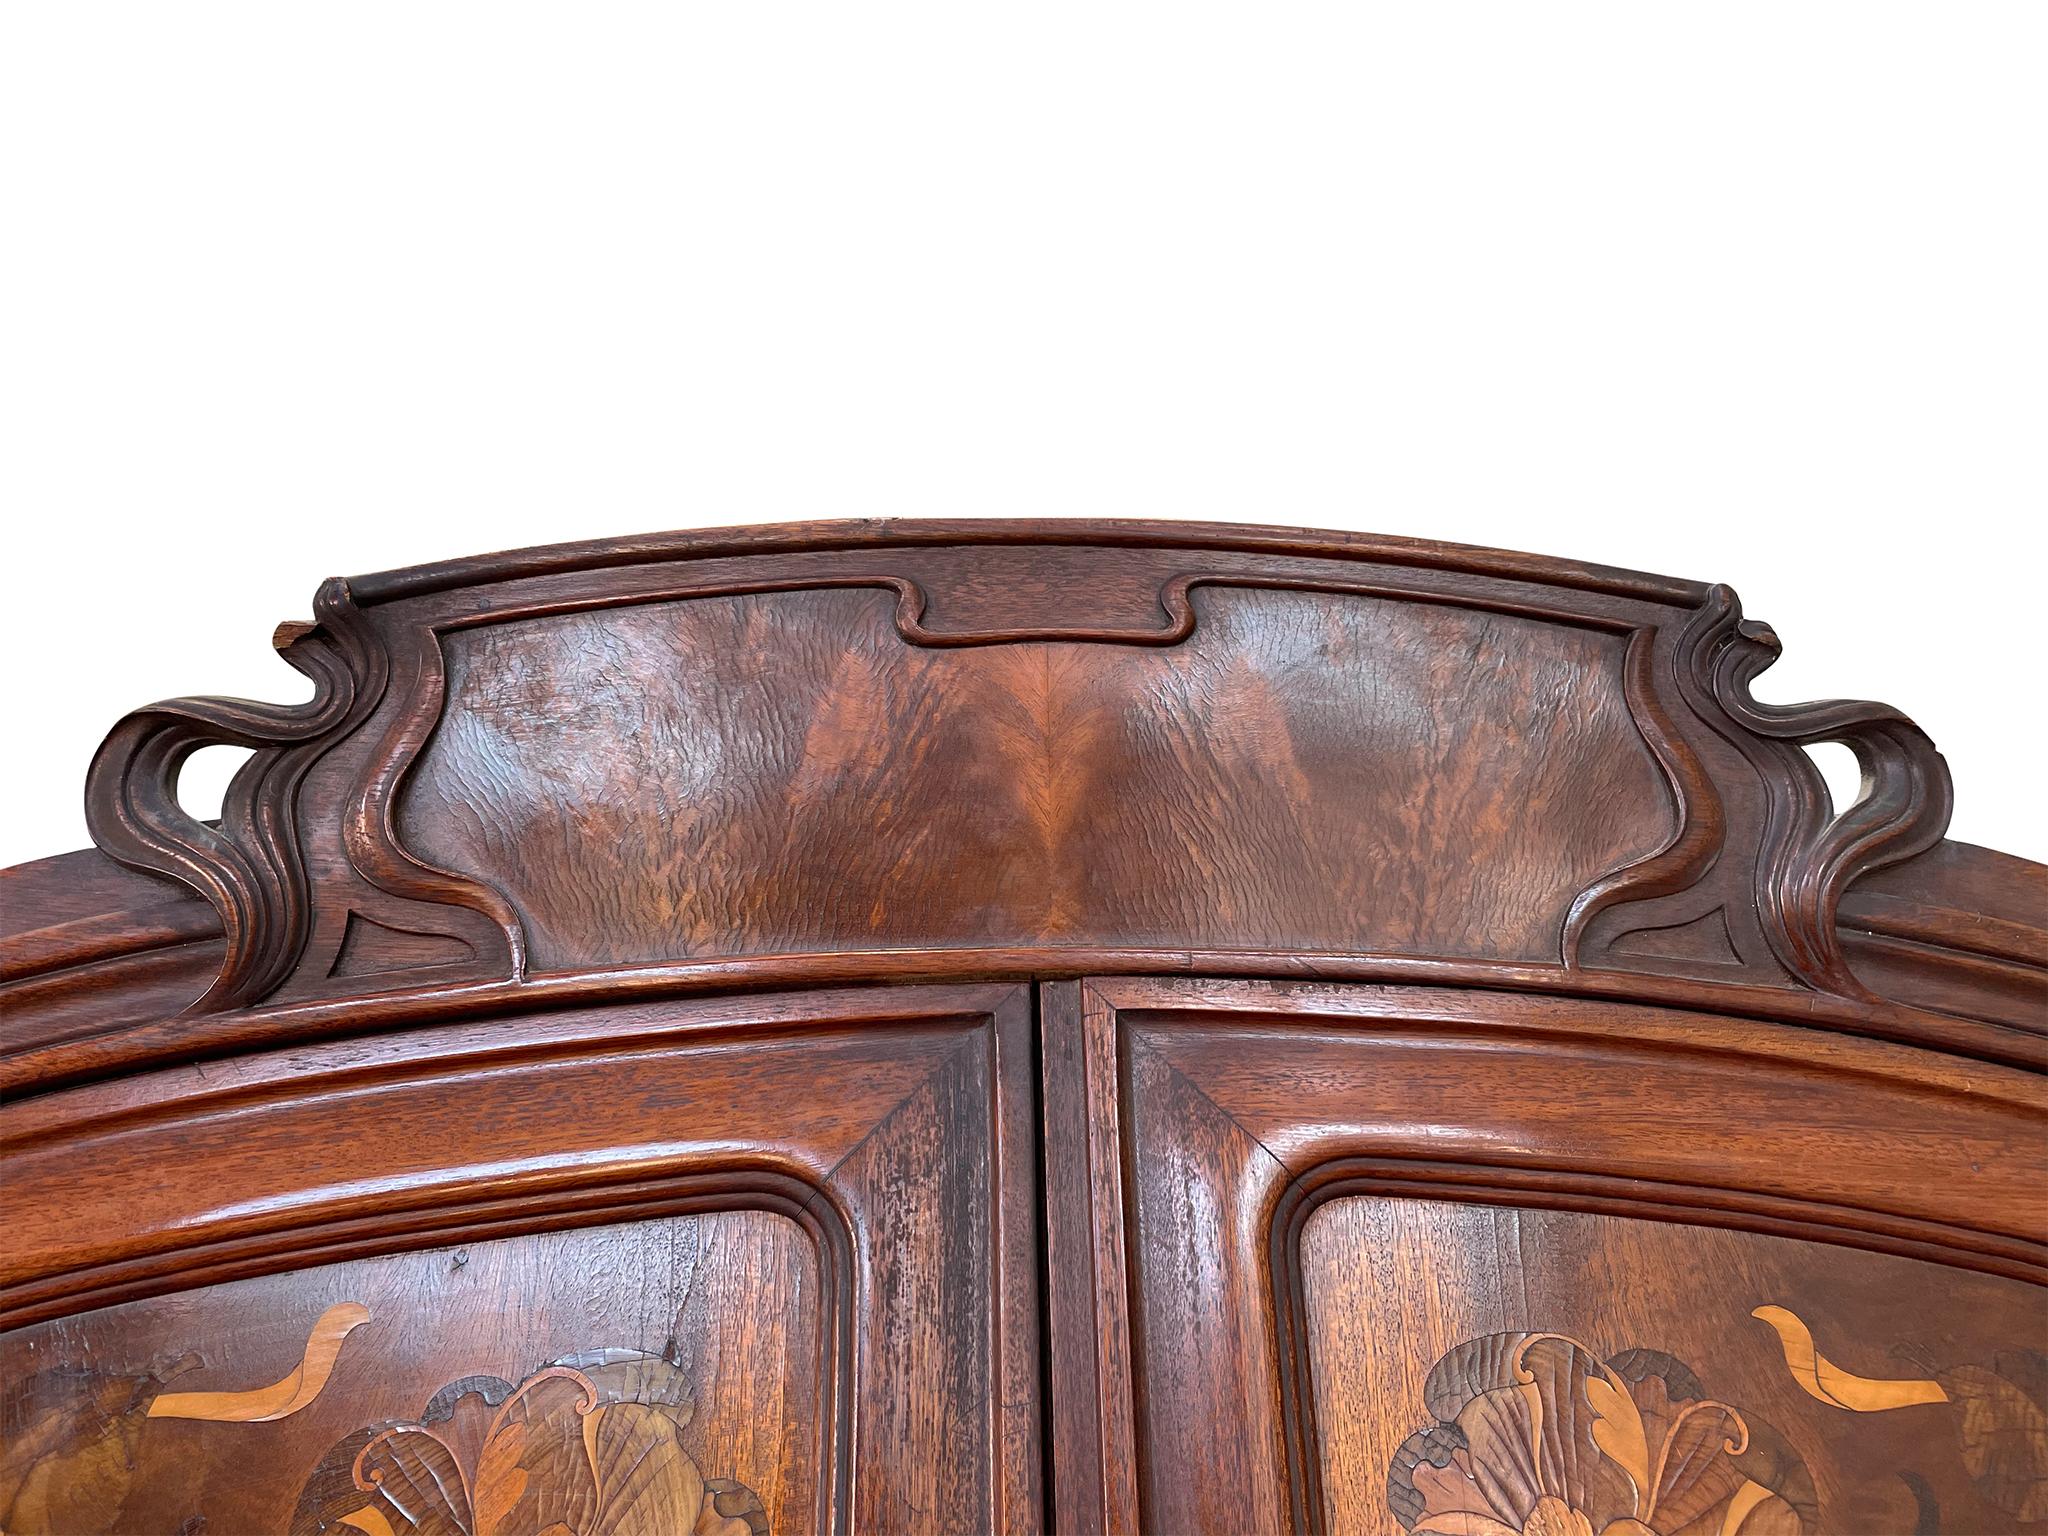 This two-door mahogany wardrobe was handcrafted in the 1900s. It has a beautiful floral inlay design framed by a curved molding that is characteristic of Art Nouveau. The wood has aged beautifully. It is a warm red-brown with a rich grain. Inside is